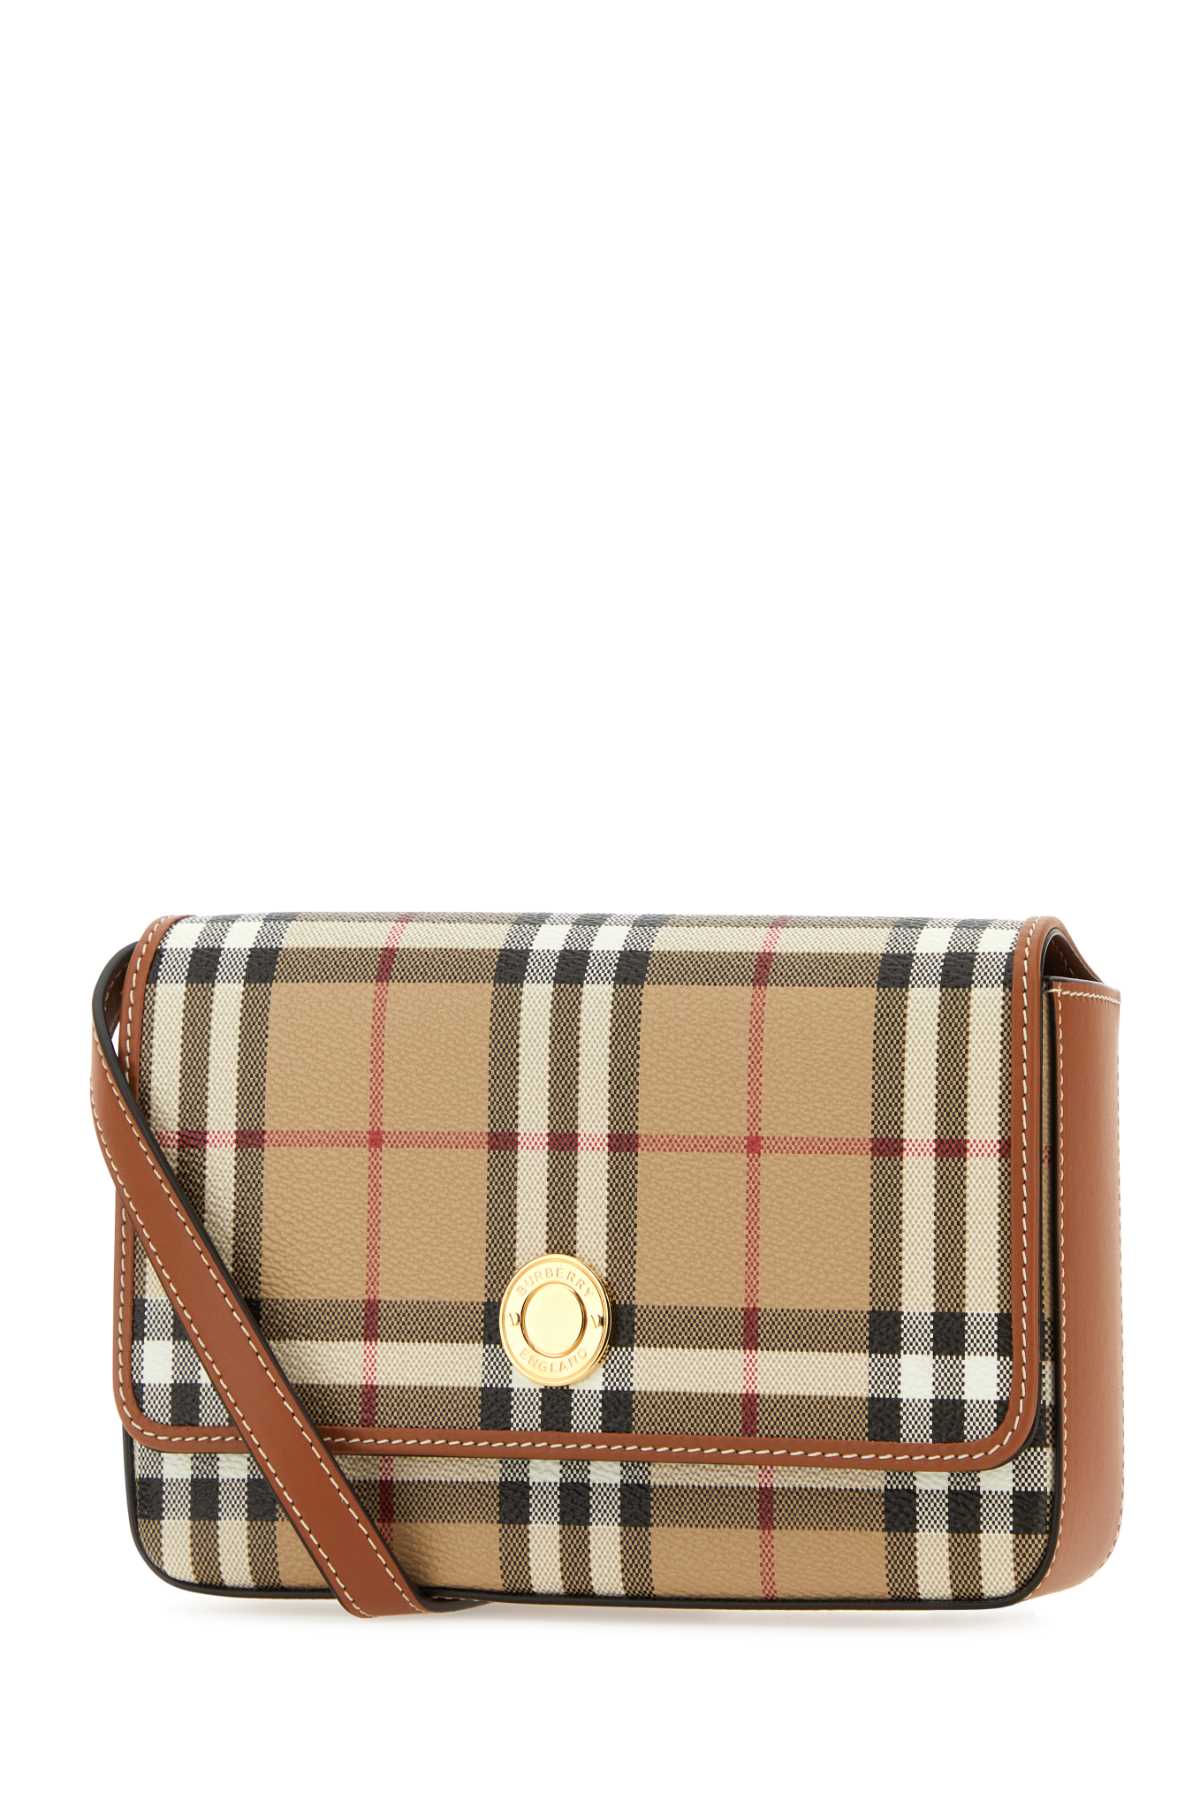 Shop Burberry Printed Canvas Hampshire Crossbody Bag In Archivebeige